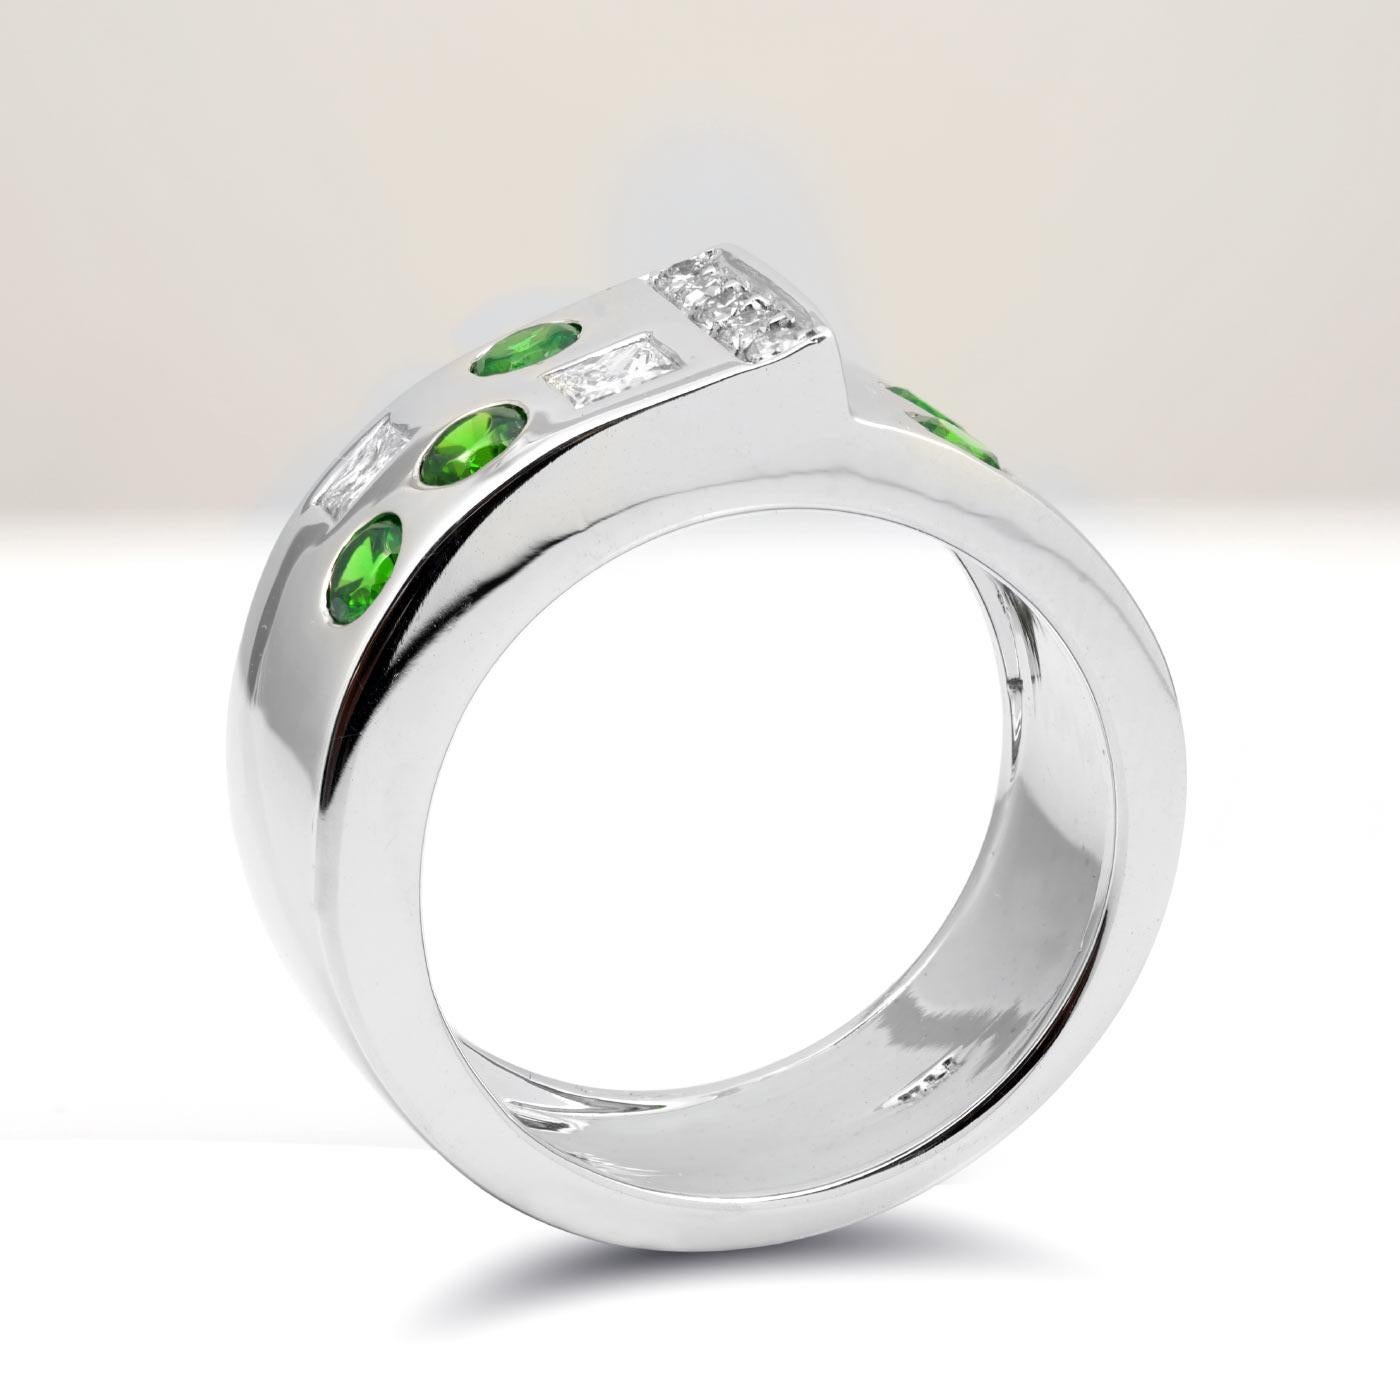 Filled with color of a lush forest these Russian Demantoid Garnets are truly ethereal. Set with accentuating diamonds that have been matched to perfection, this contemporary band makes a bold statement. The cool toned 14K white gold metal is what